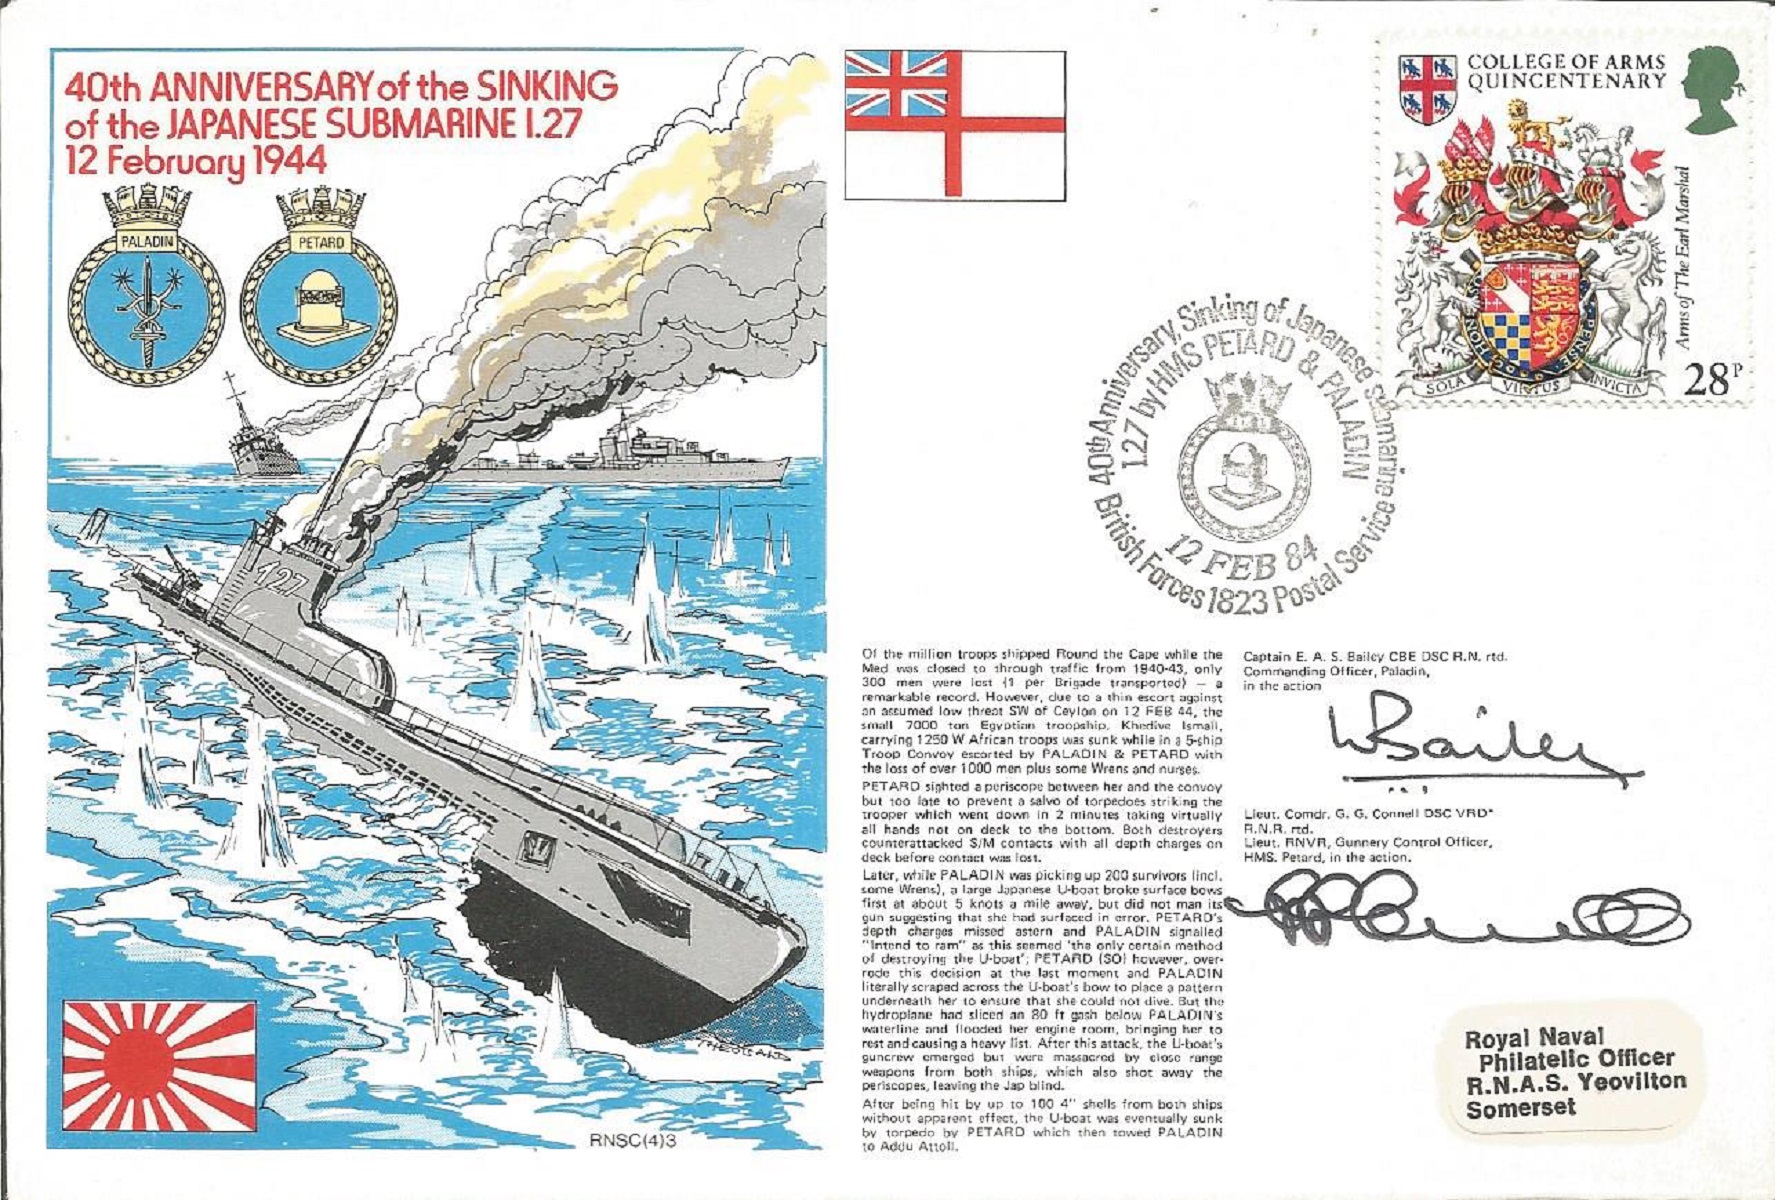 Captain E A S Bailey and Lieut Comdr G G Connell signed RNSC(4)3 cover commemorating the 40th